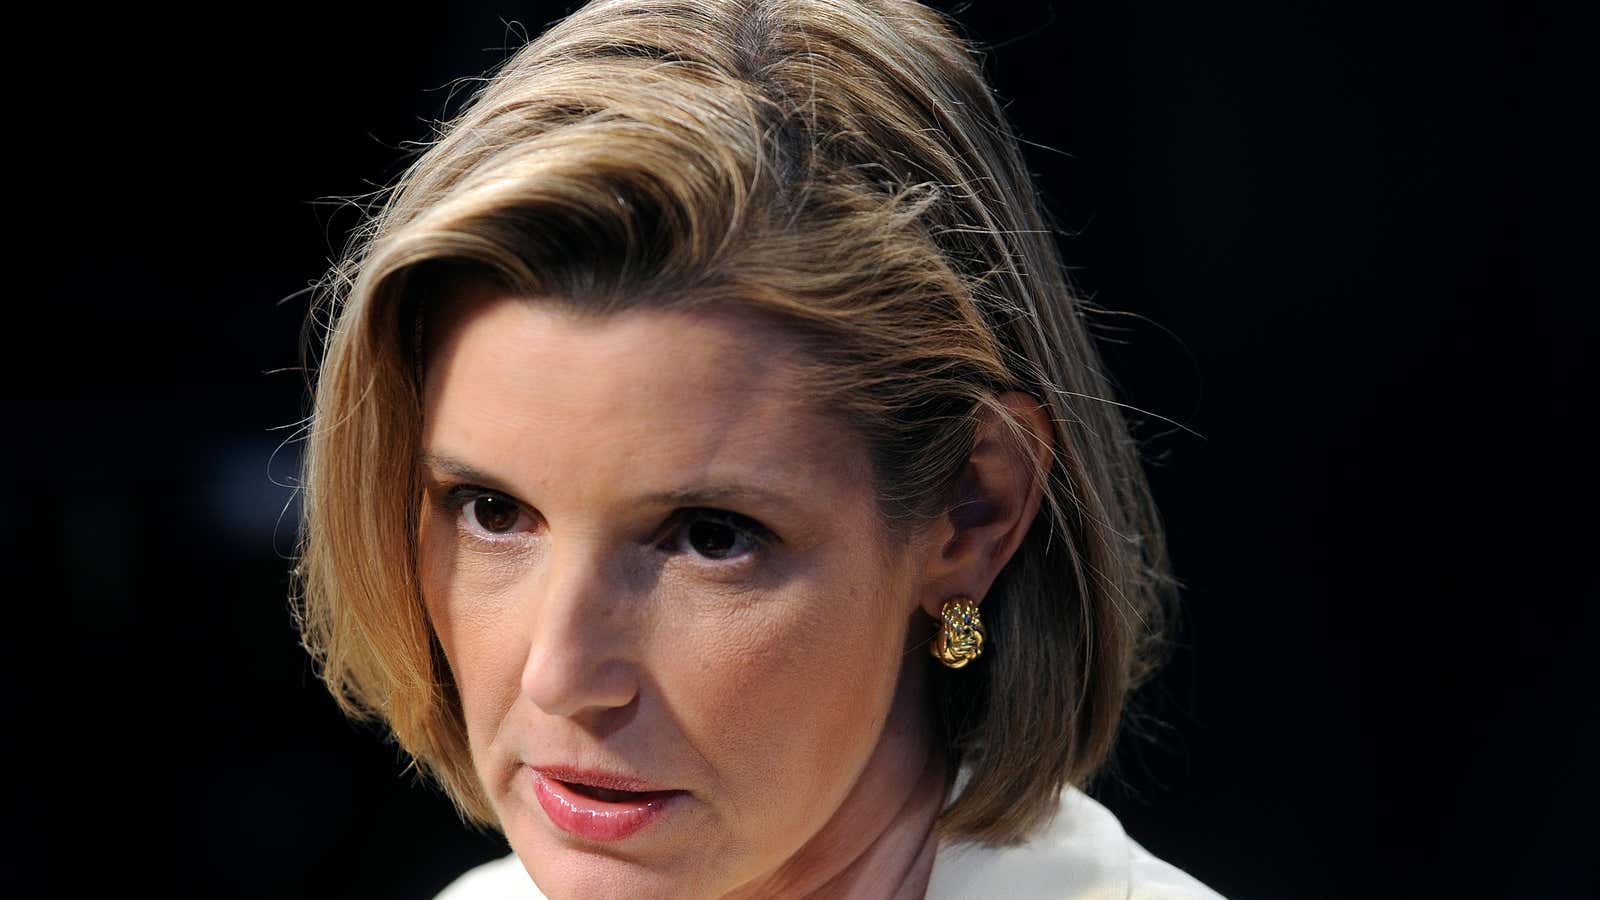 Sallie Krawcheck’s family was surprised to learn of her history of sexual harassment.